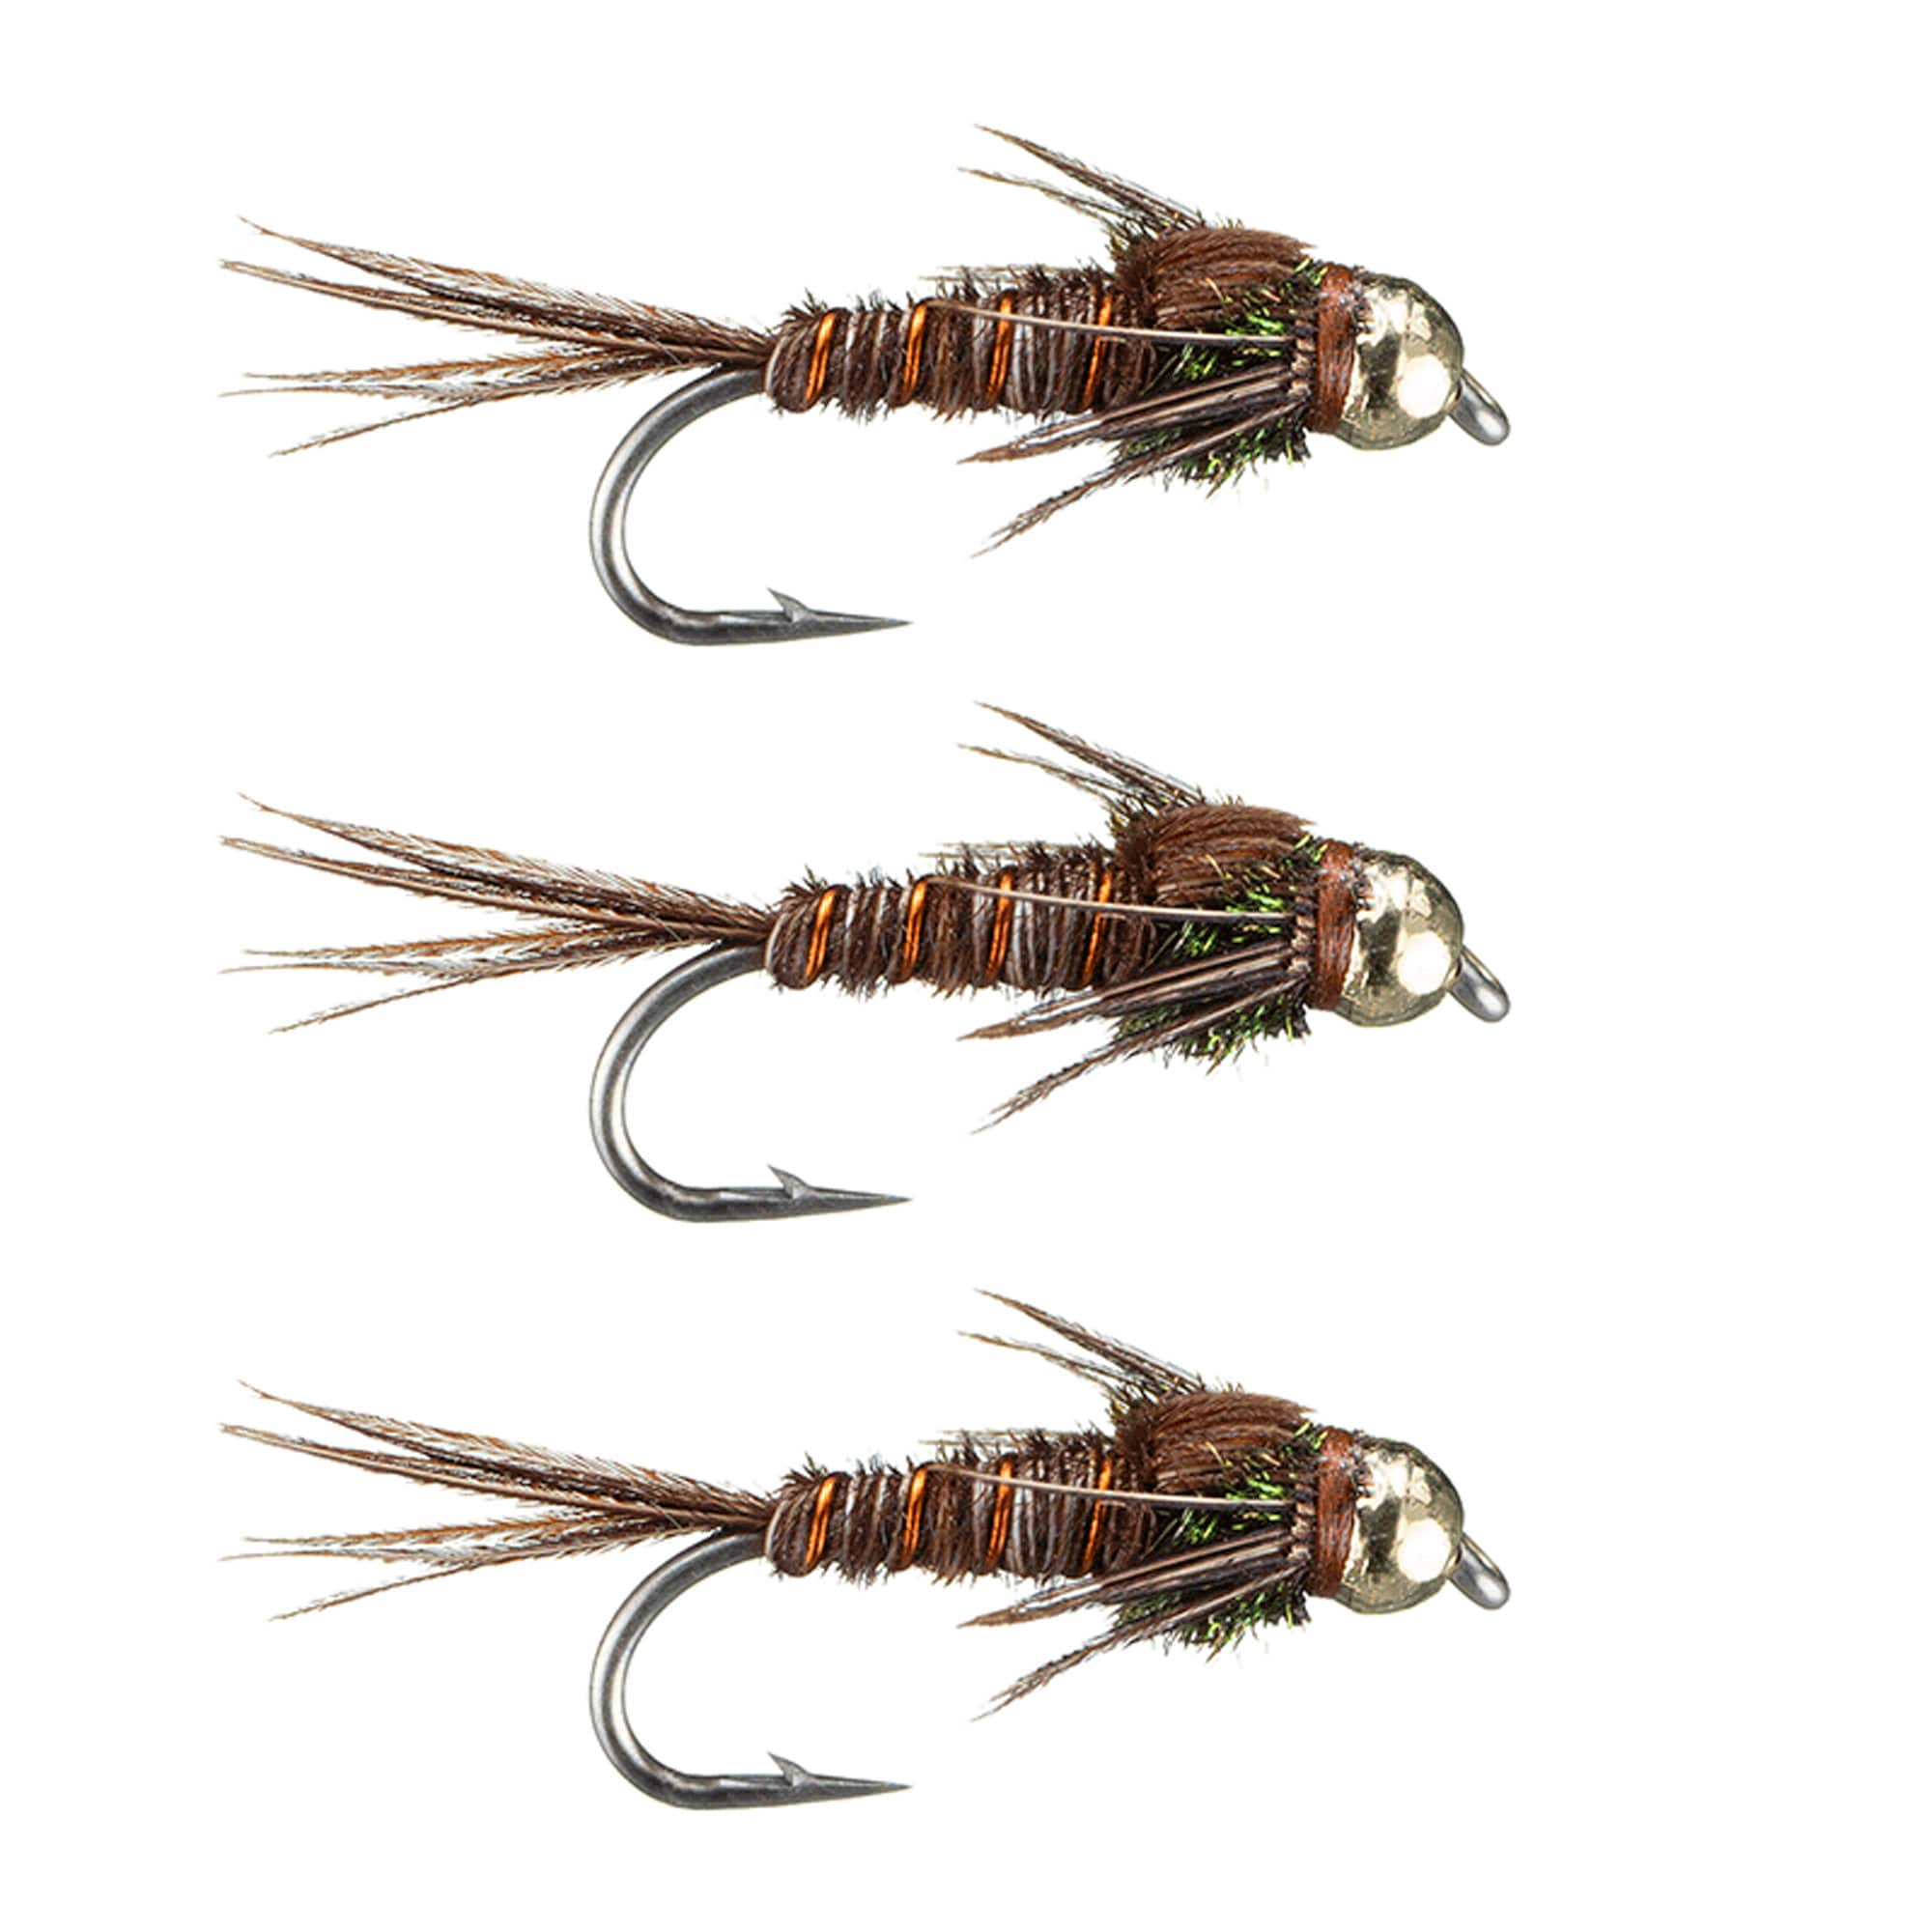 Pheasant Tail Nymph Fly Fishing Flies for Trout Tungsten Bead Head Pheasant  Tail Popular Fly Fishing Flies and Fishing Lures 3 Pack -  Hong Kong